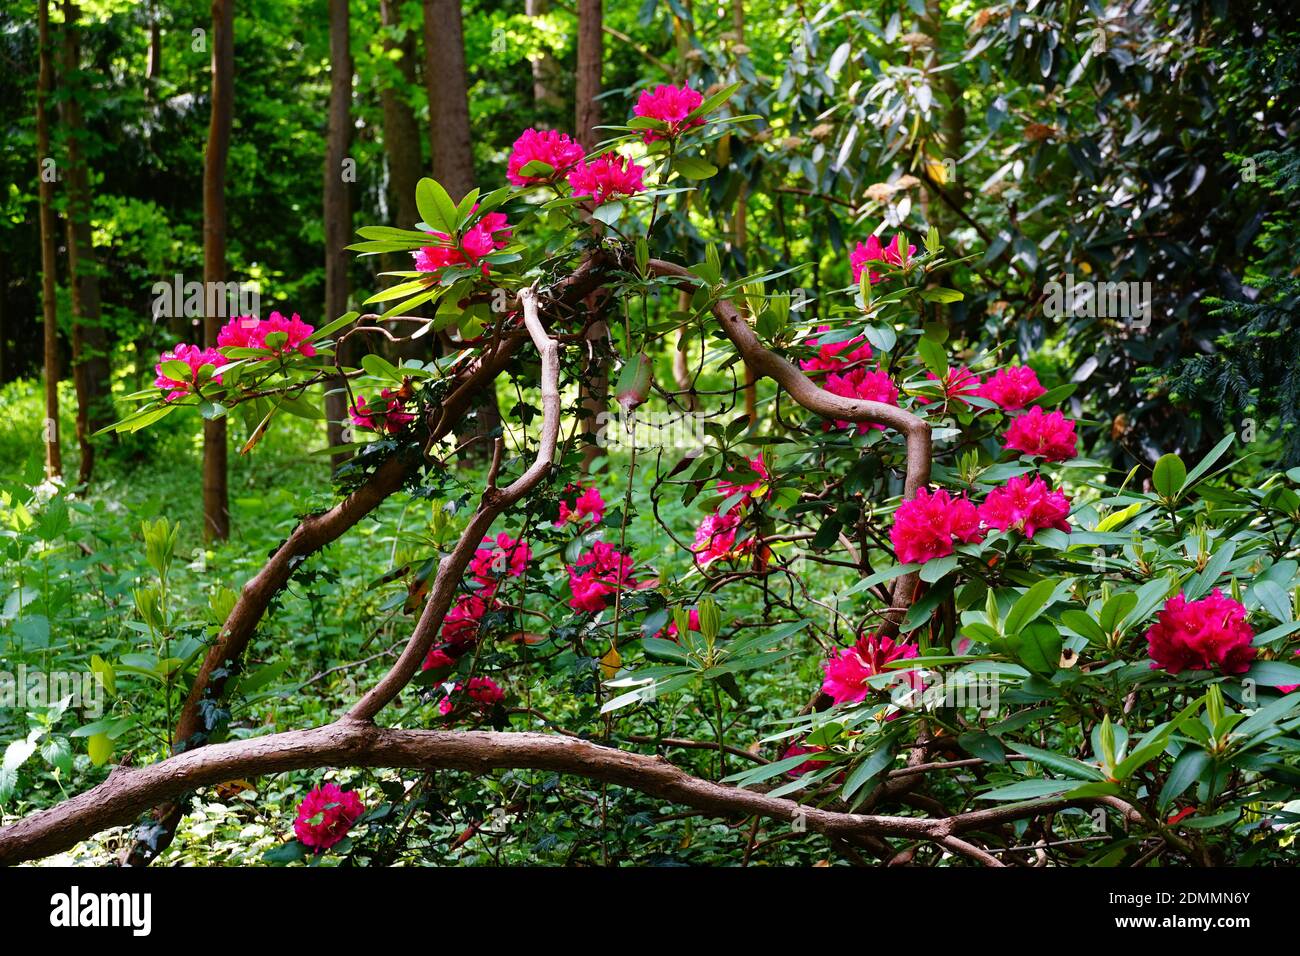 A closeup of a Rhododendron plant with pink flowers blooming in the woods Stock Photo